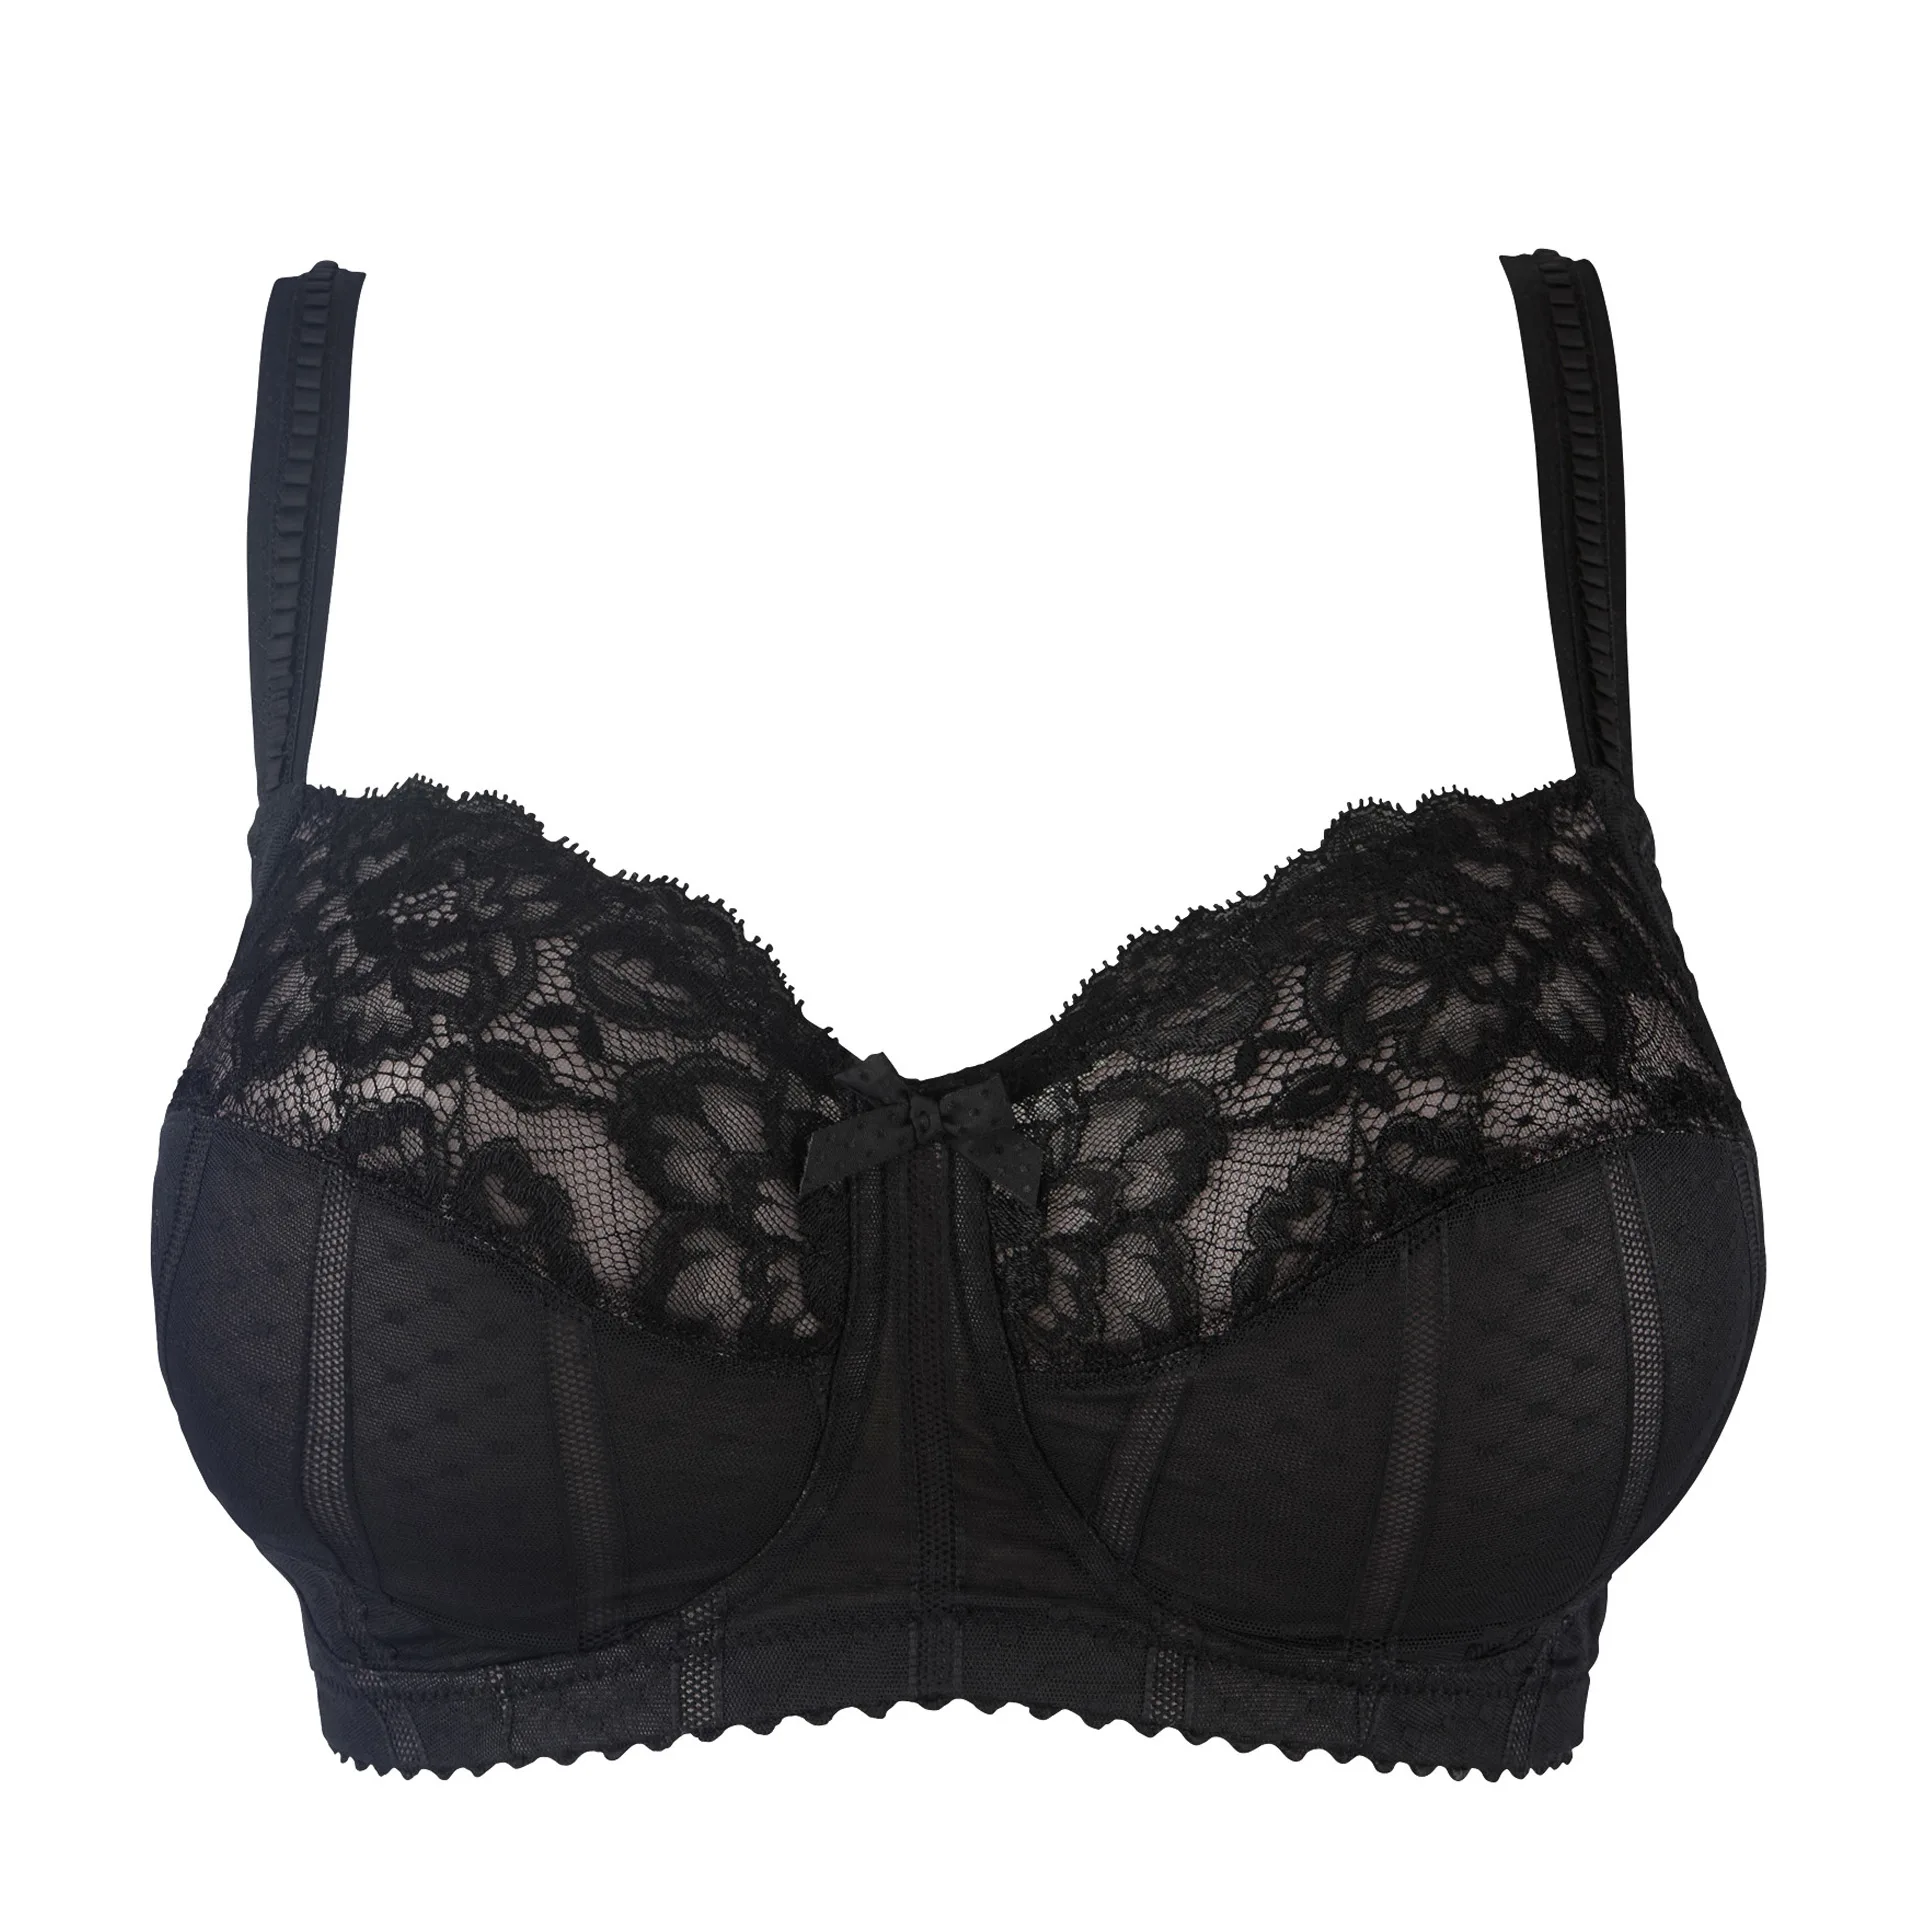 New Arrivals: Couture Bra by Prima Donna now available at Dianes Lingerie